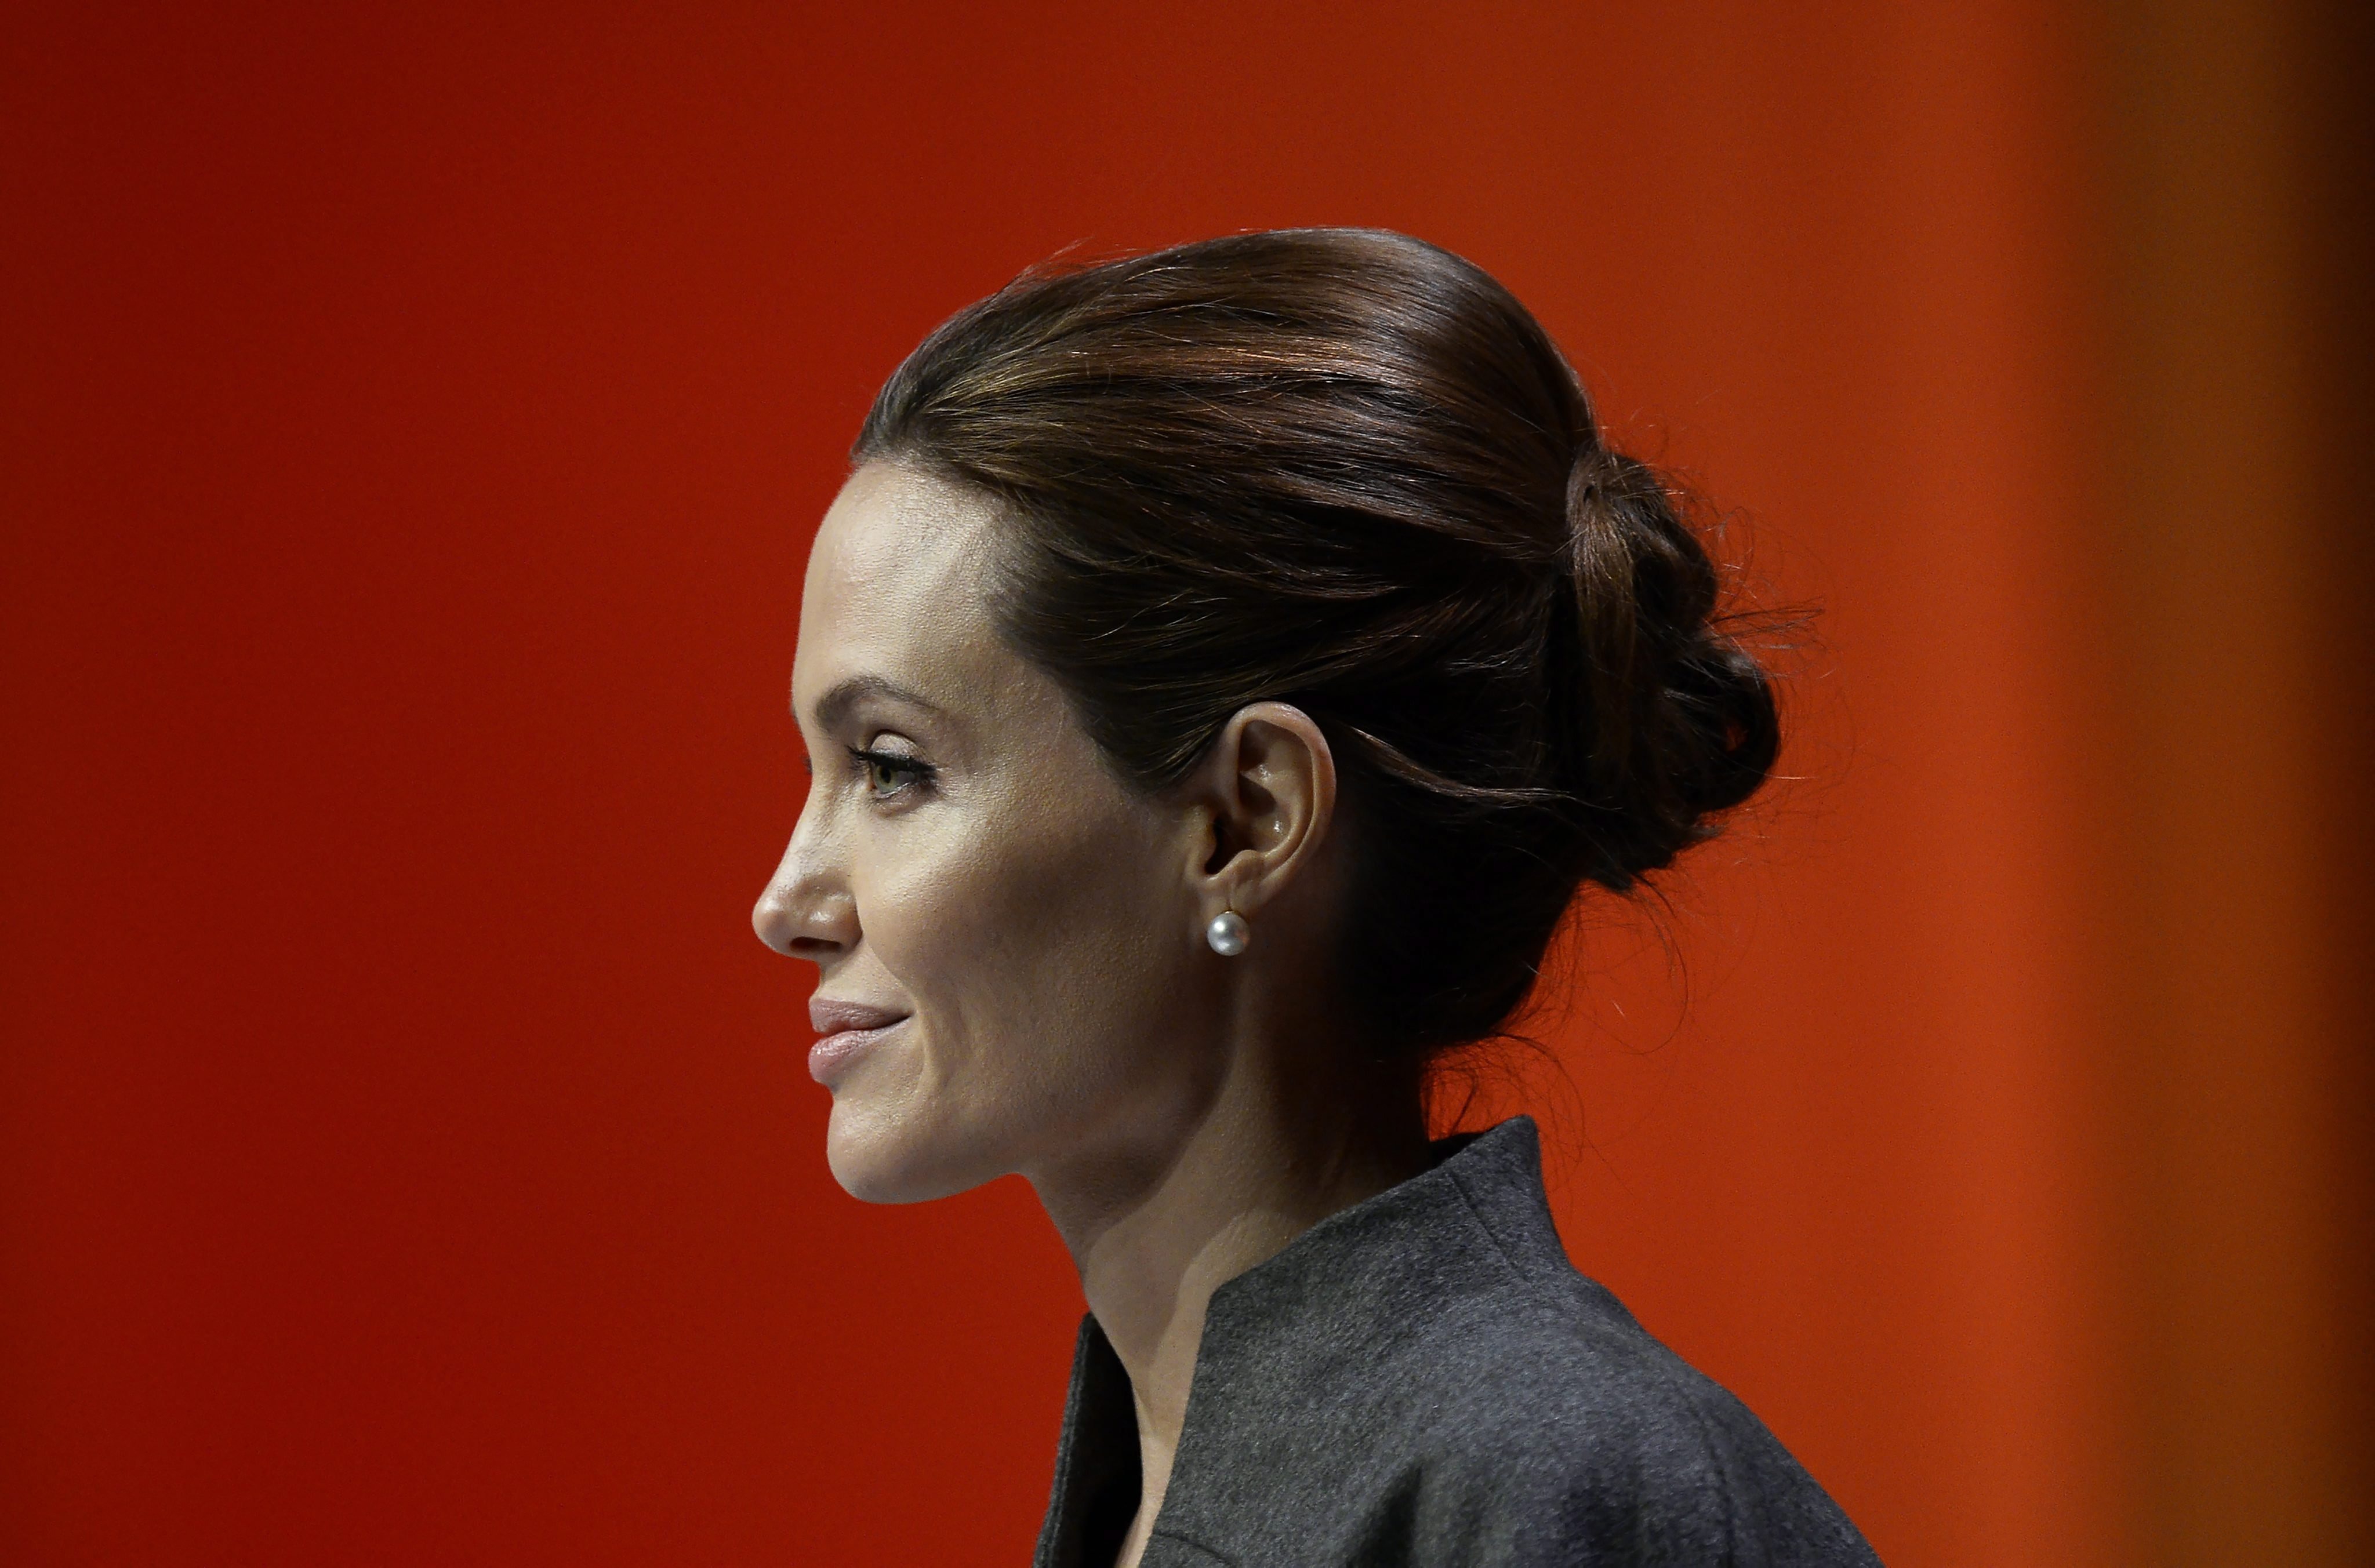 US actress Angelina Jolie speaks at the Global Summit to End Sexual Violence in Conflict at the Excel Centre in London, Britain, June 13, 2014. (Facundo Arrizabalaga—EPA)